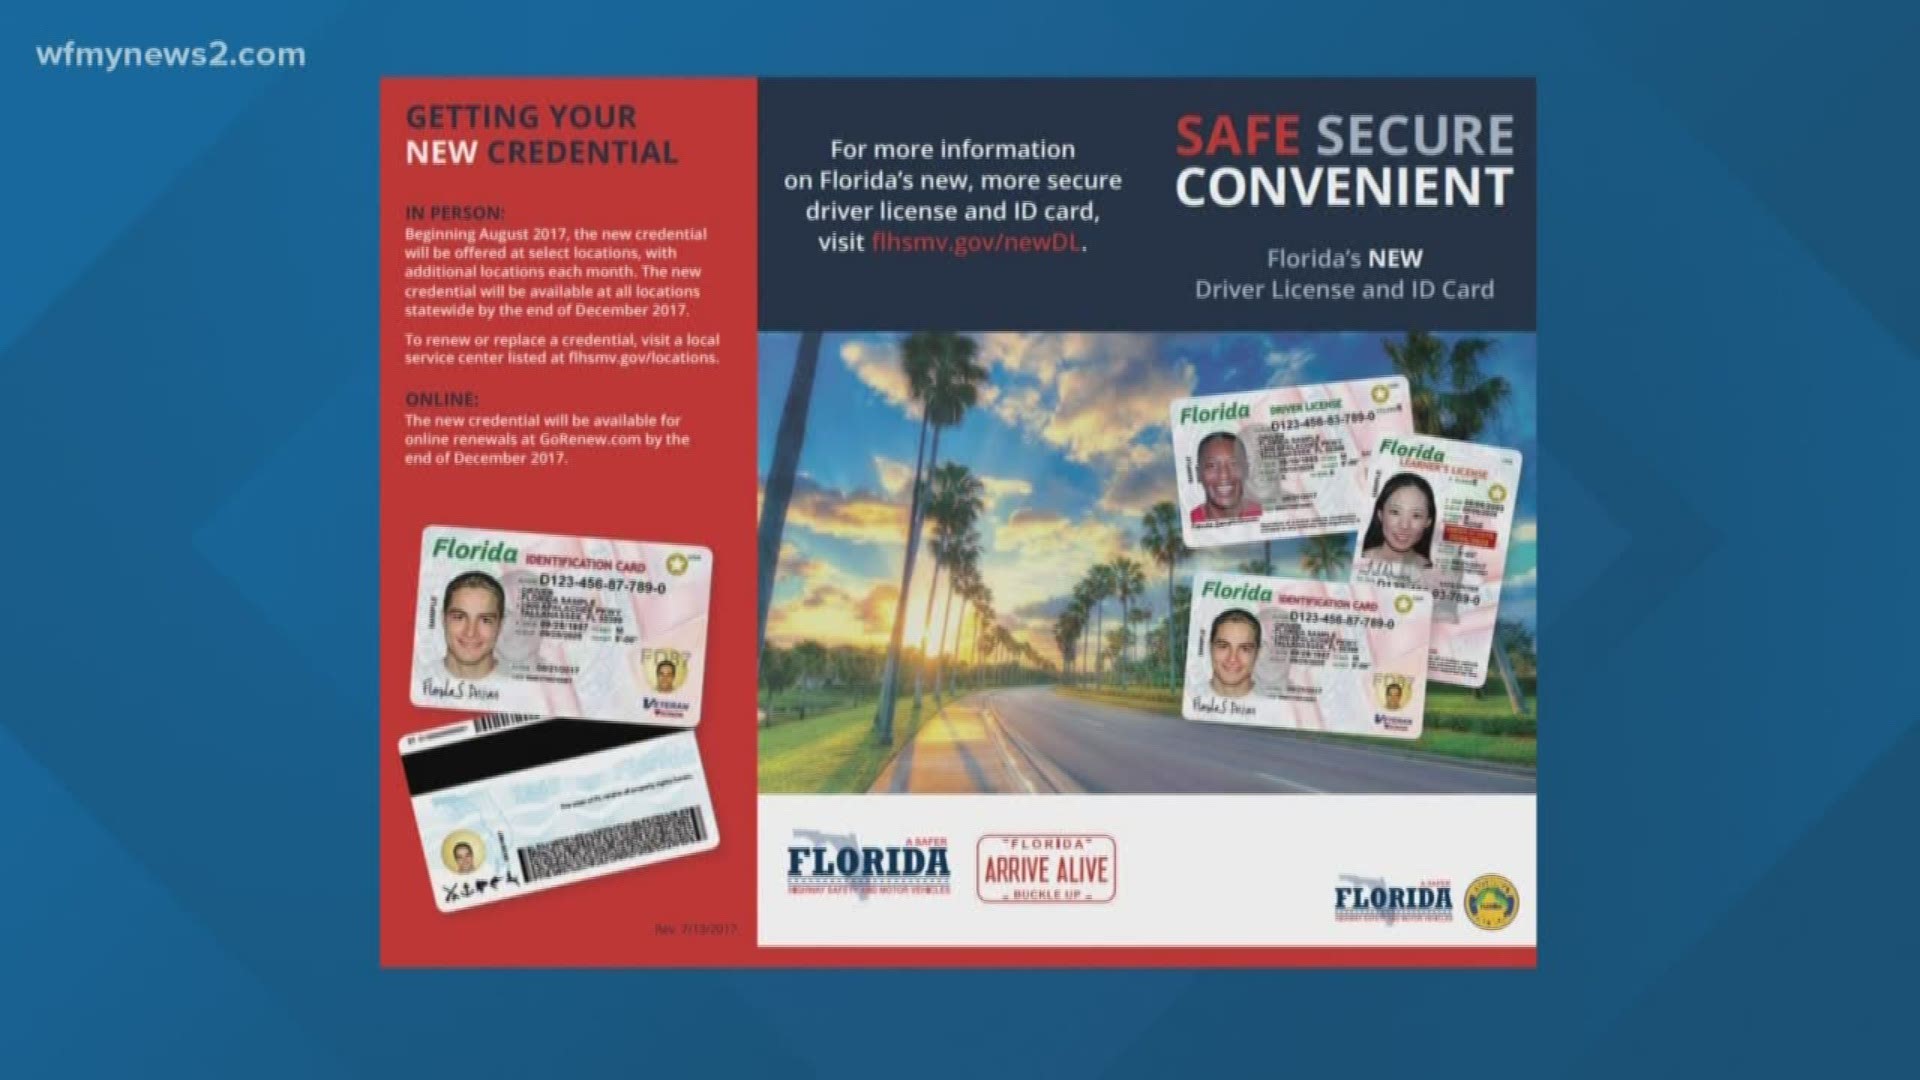 90% of drivers in Florida have REAL IDs, and we’re learning what were some of their biggest issues that could help us here.